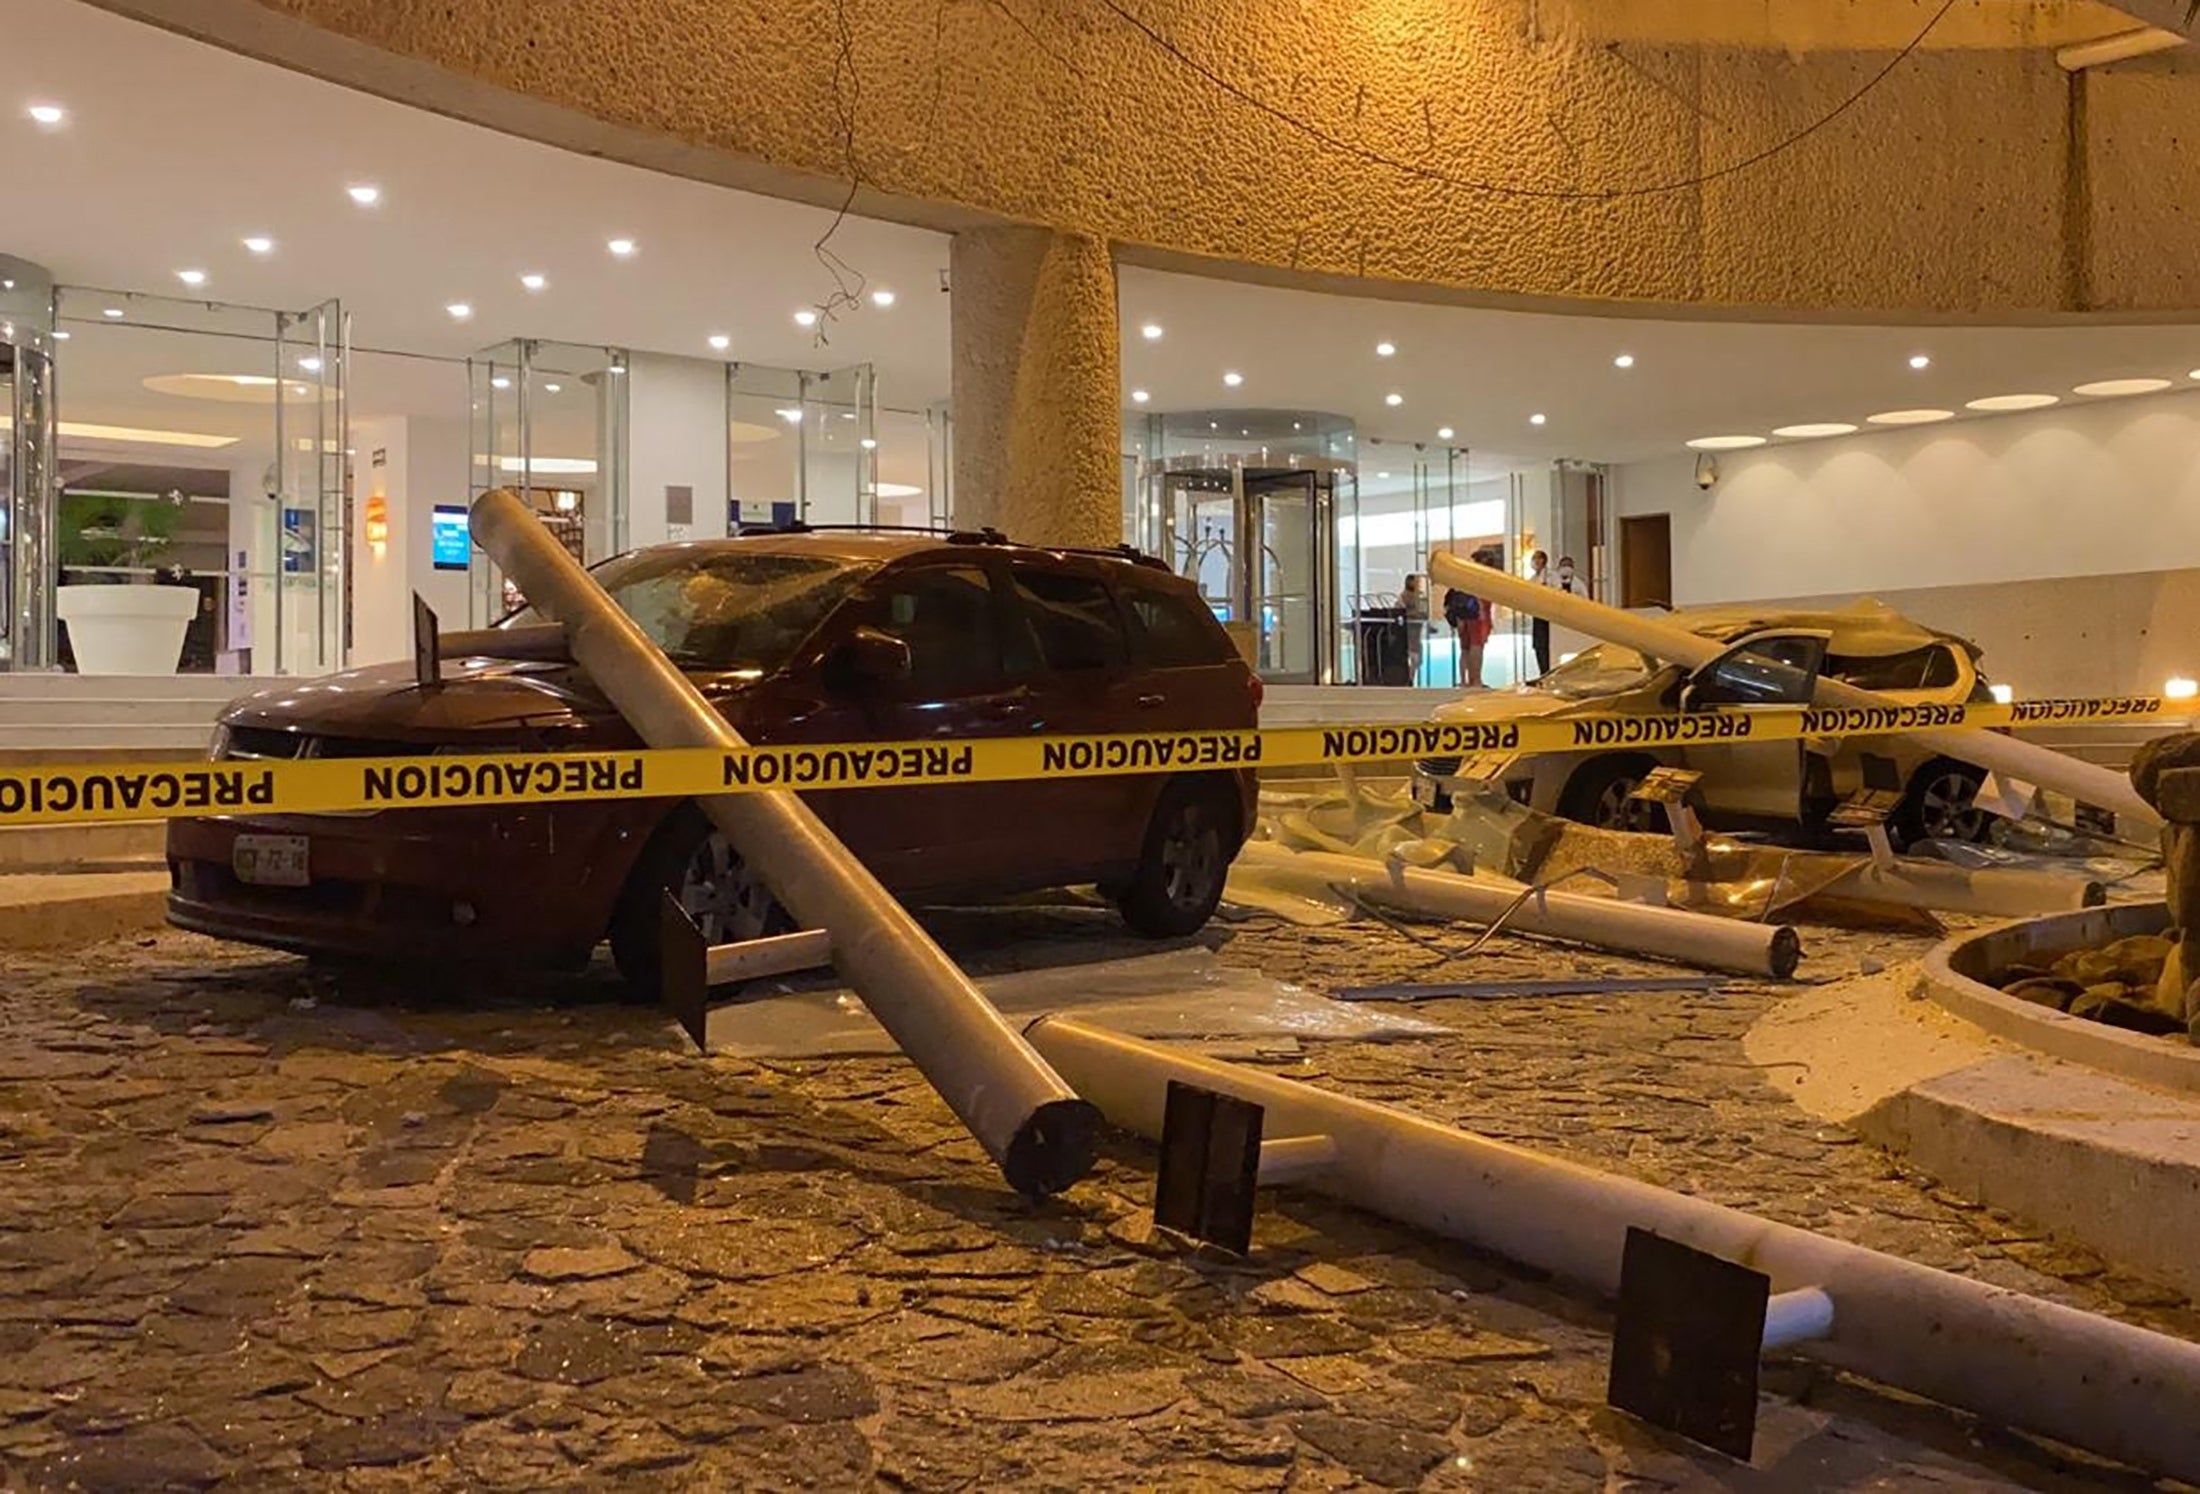 View of damaged cars outside a hotel after a quake in Acapulco, Guerrero state, Mexico on September 7, 2021. - A 6.9 magnitude earthquake struck Mexico on Tuesday near the Pacific coast, the National Seismological Service said, shaking buildings in the capital. The epicenter was 14 kilometers (nine miles) southeast of the beach resort of Acapulco in Guerrero state, the service said. (Photo by FRANCISCO ROBLES / AFP) (Photo by FRANCISCO ROBLES/AFP via Getty Images)